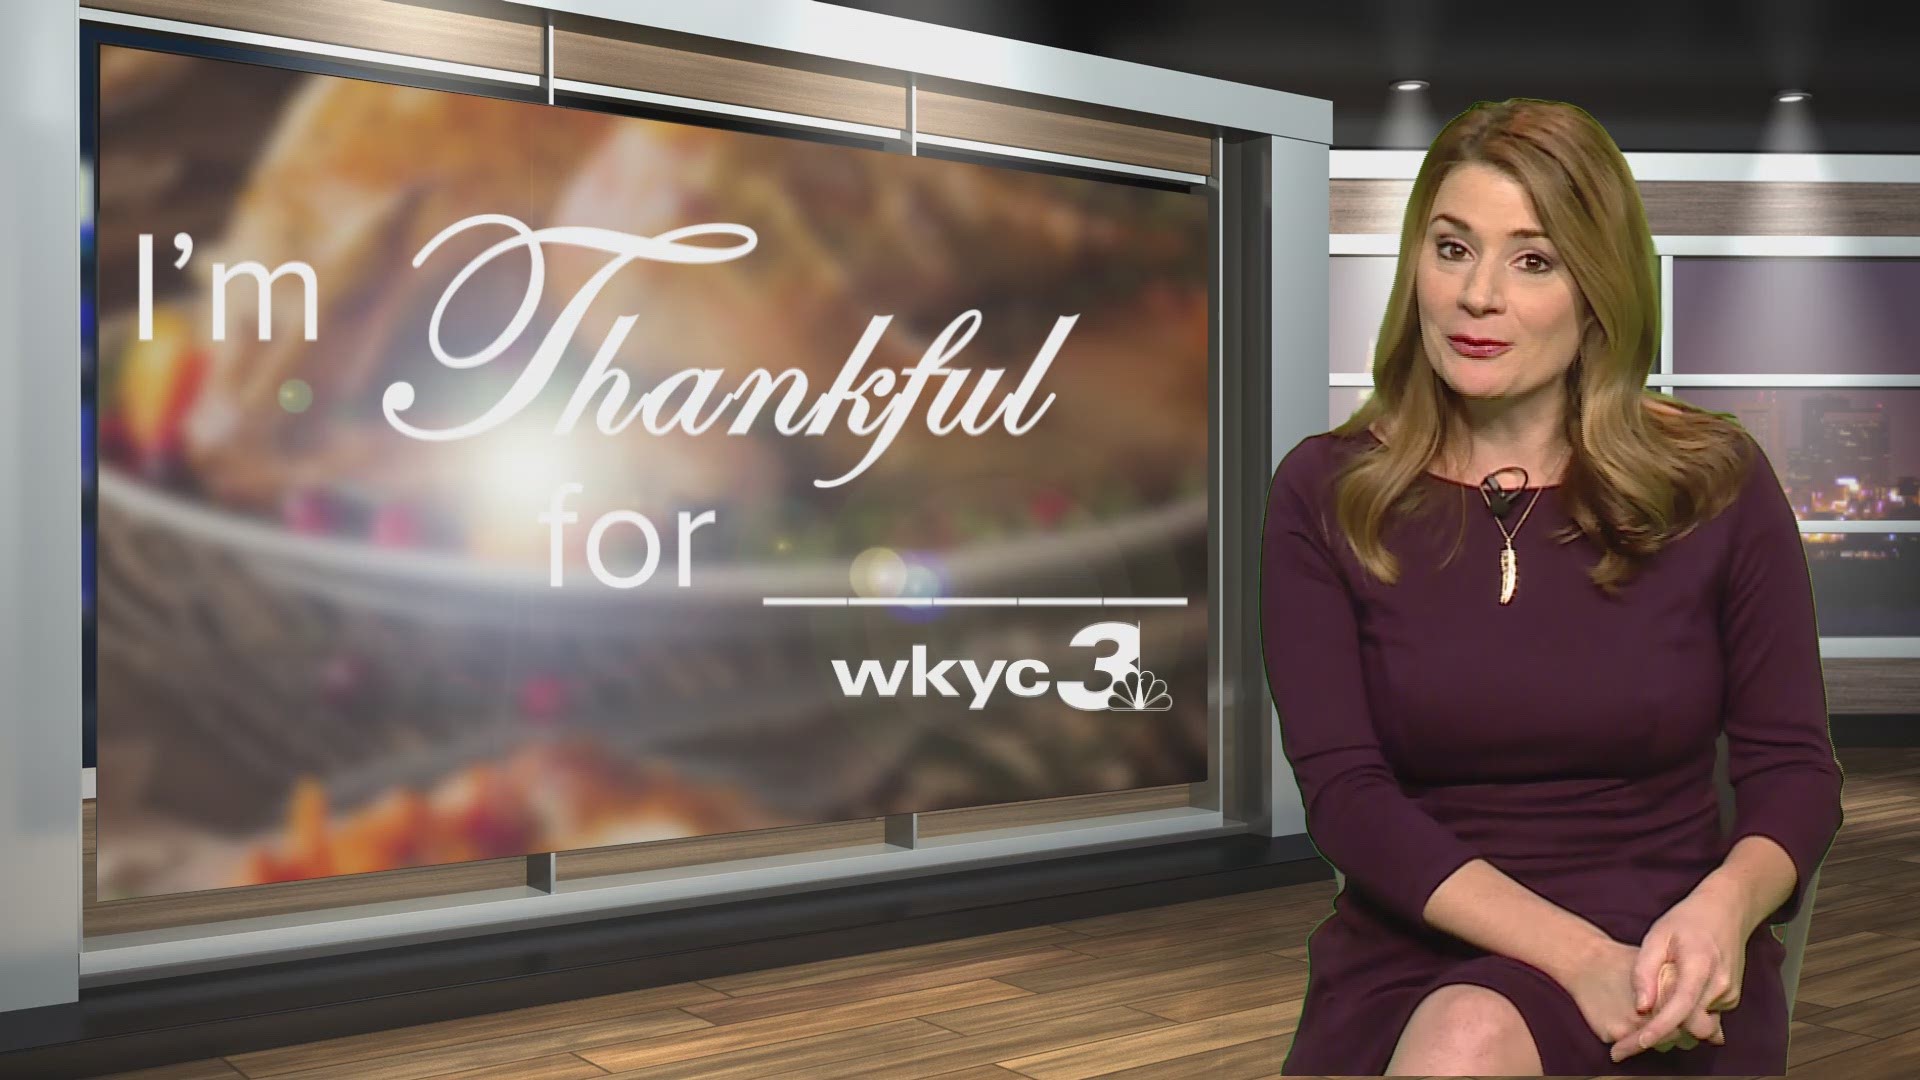 Maureen Kyle tells us what she's thankful for this Thanksgiving.